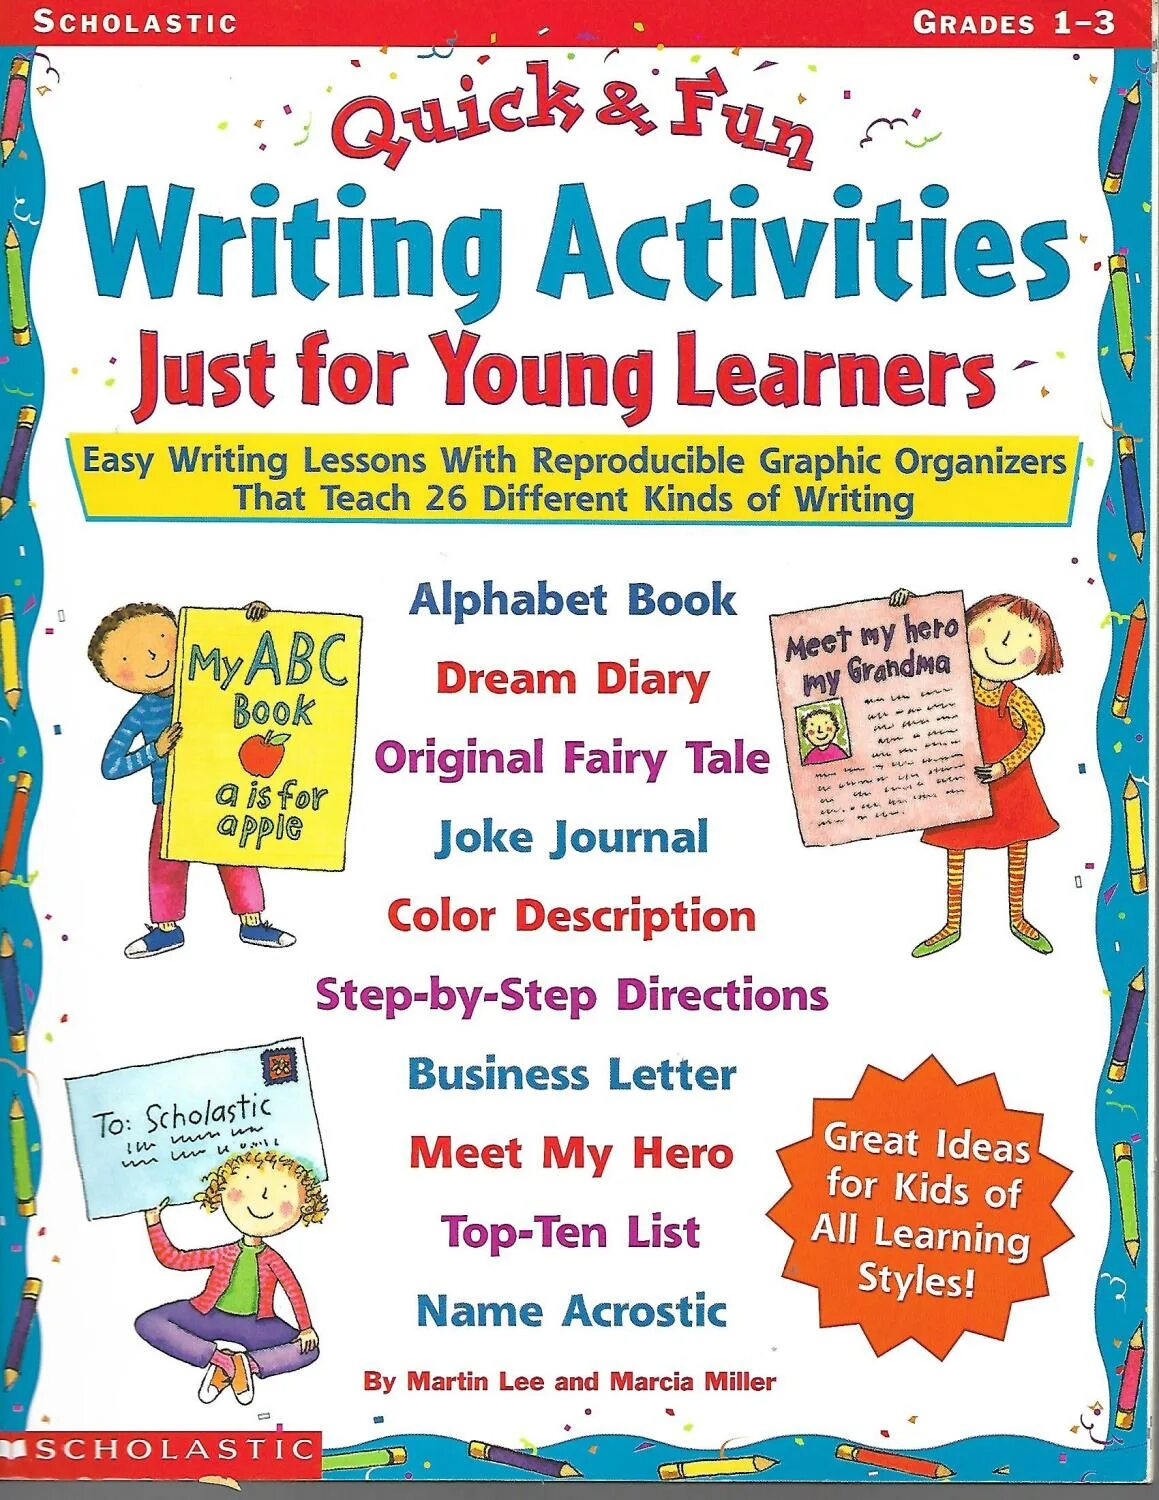 Just active. Writing activities for young Learners. Teaching young Learners English. Activities for teaching writing. Teaching for young Learners.